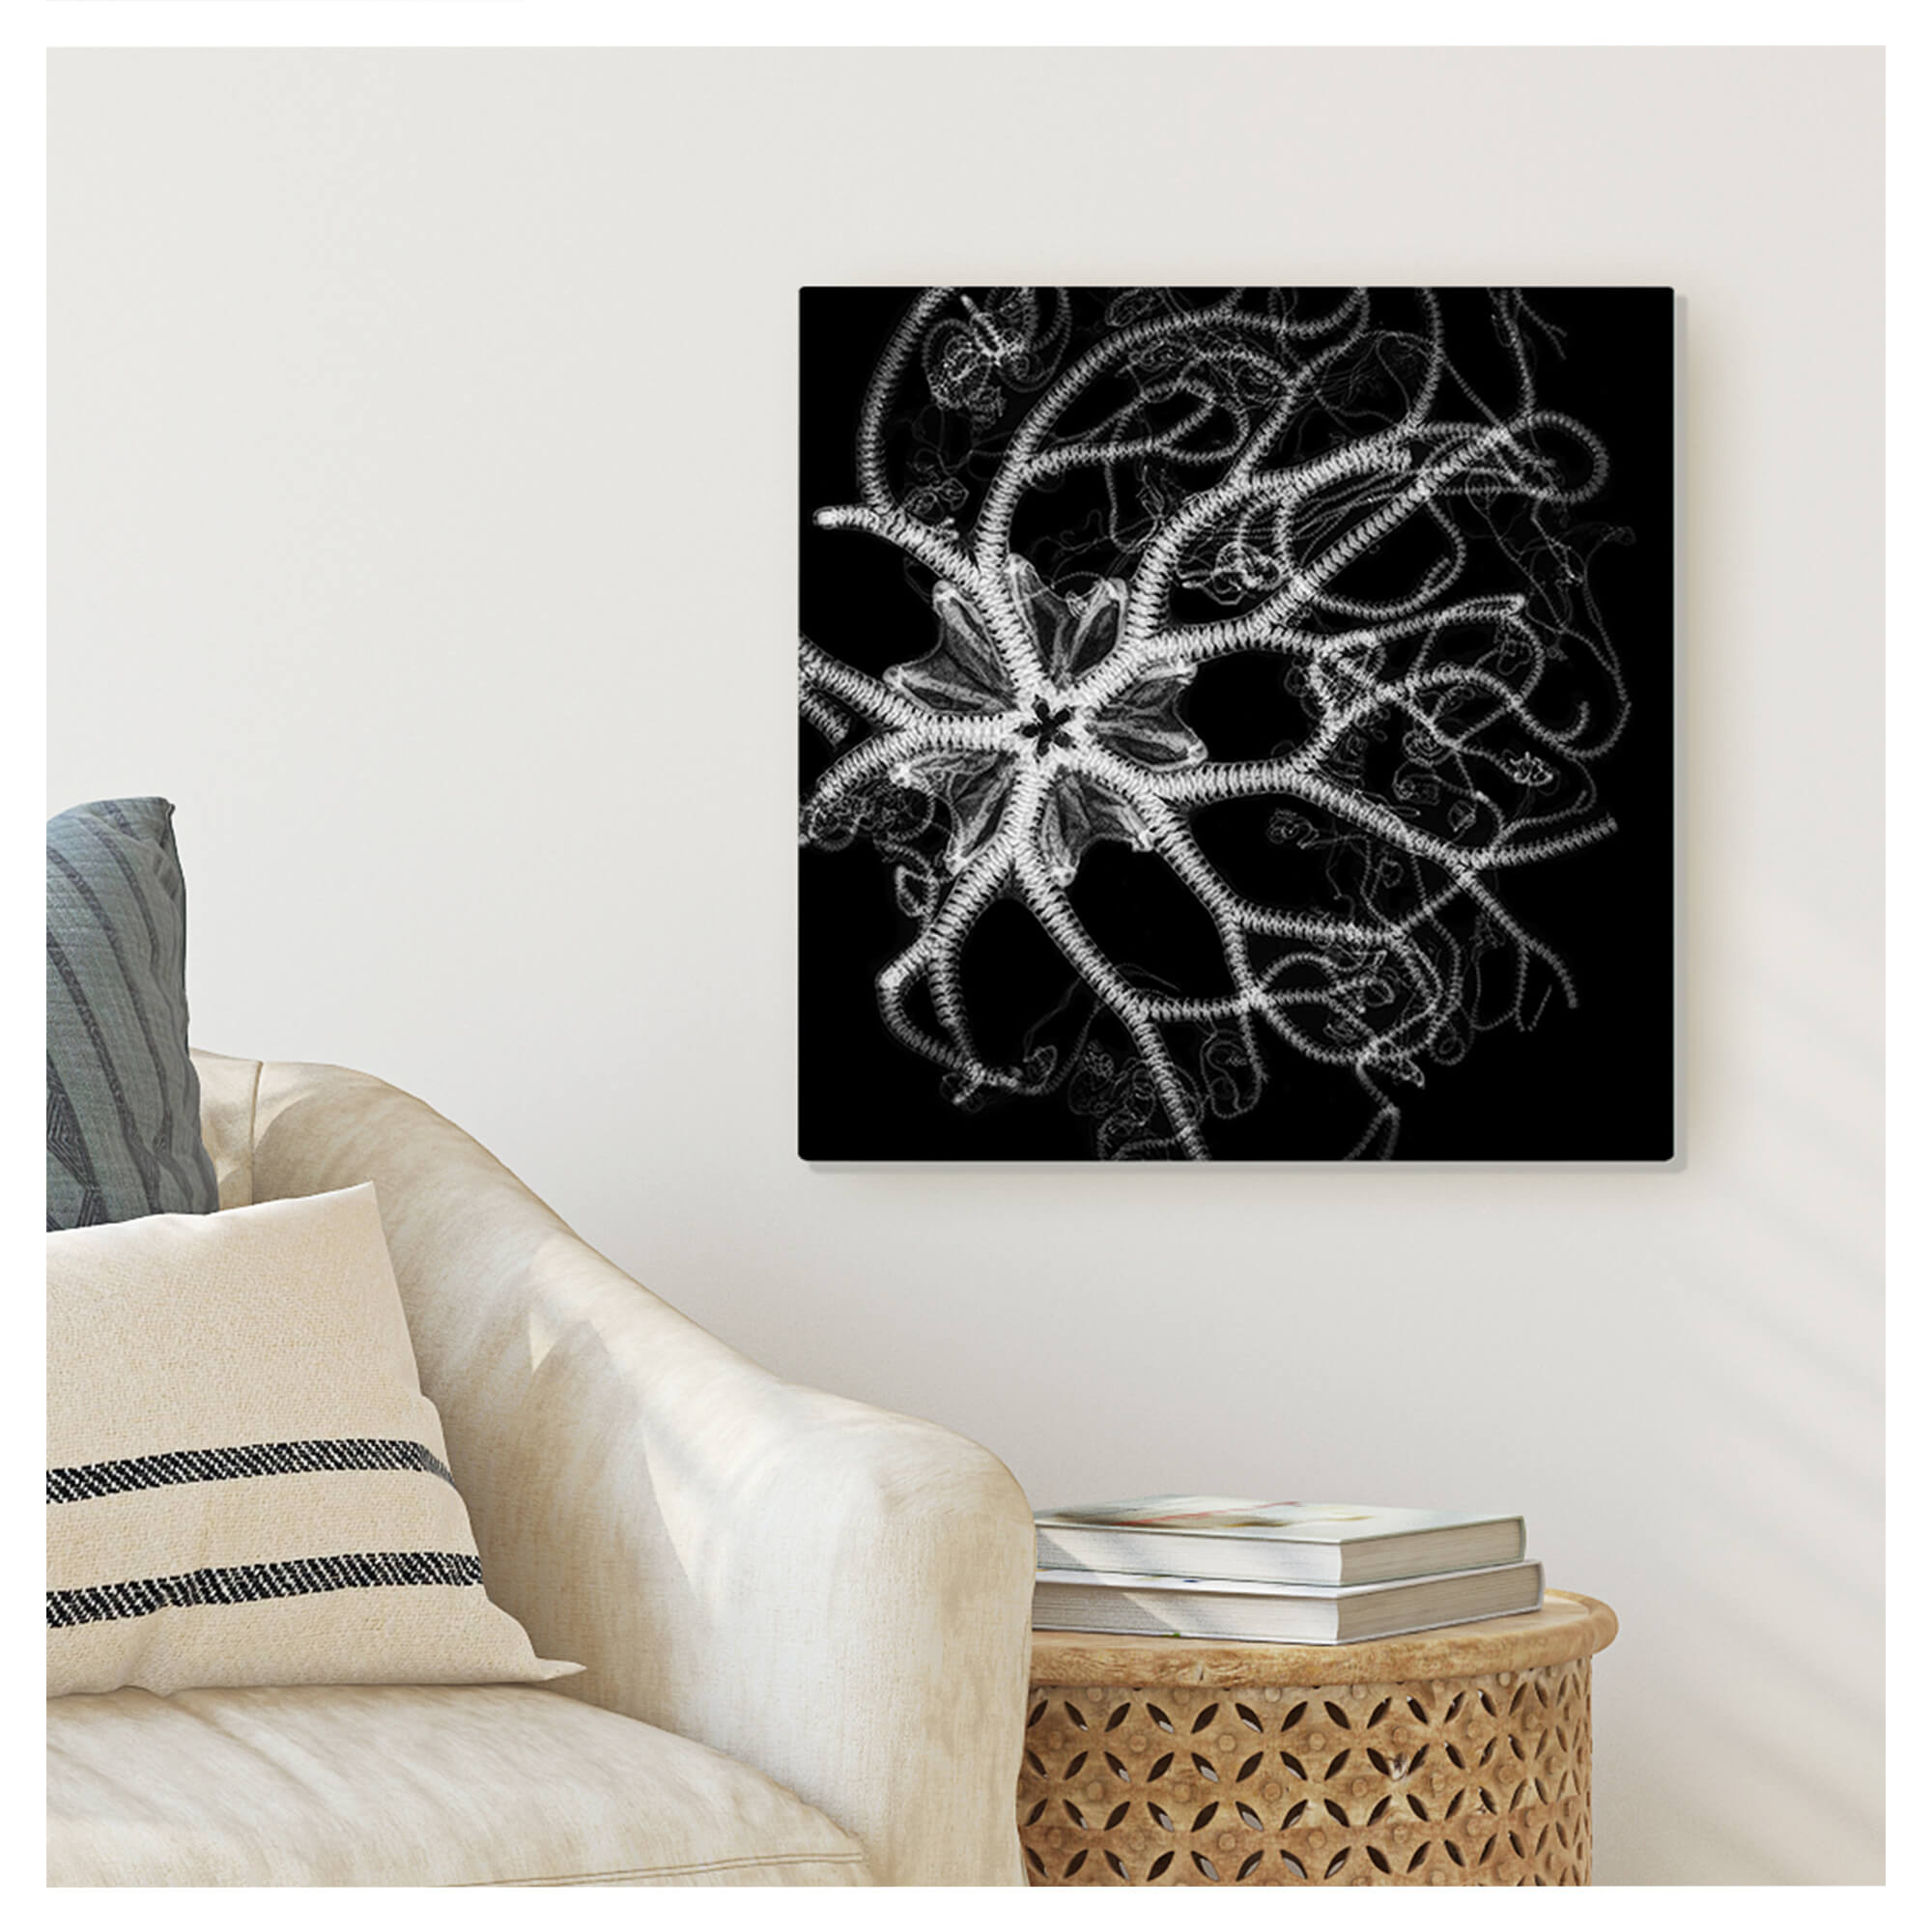 Wall mockup of a X-ray print with a mesmerizing basket star by Hawaii artist Michelle Smith